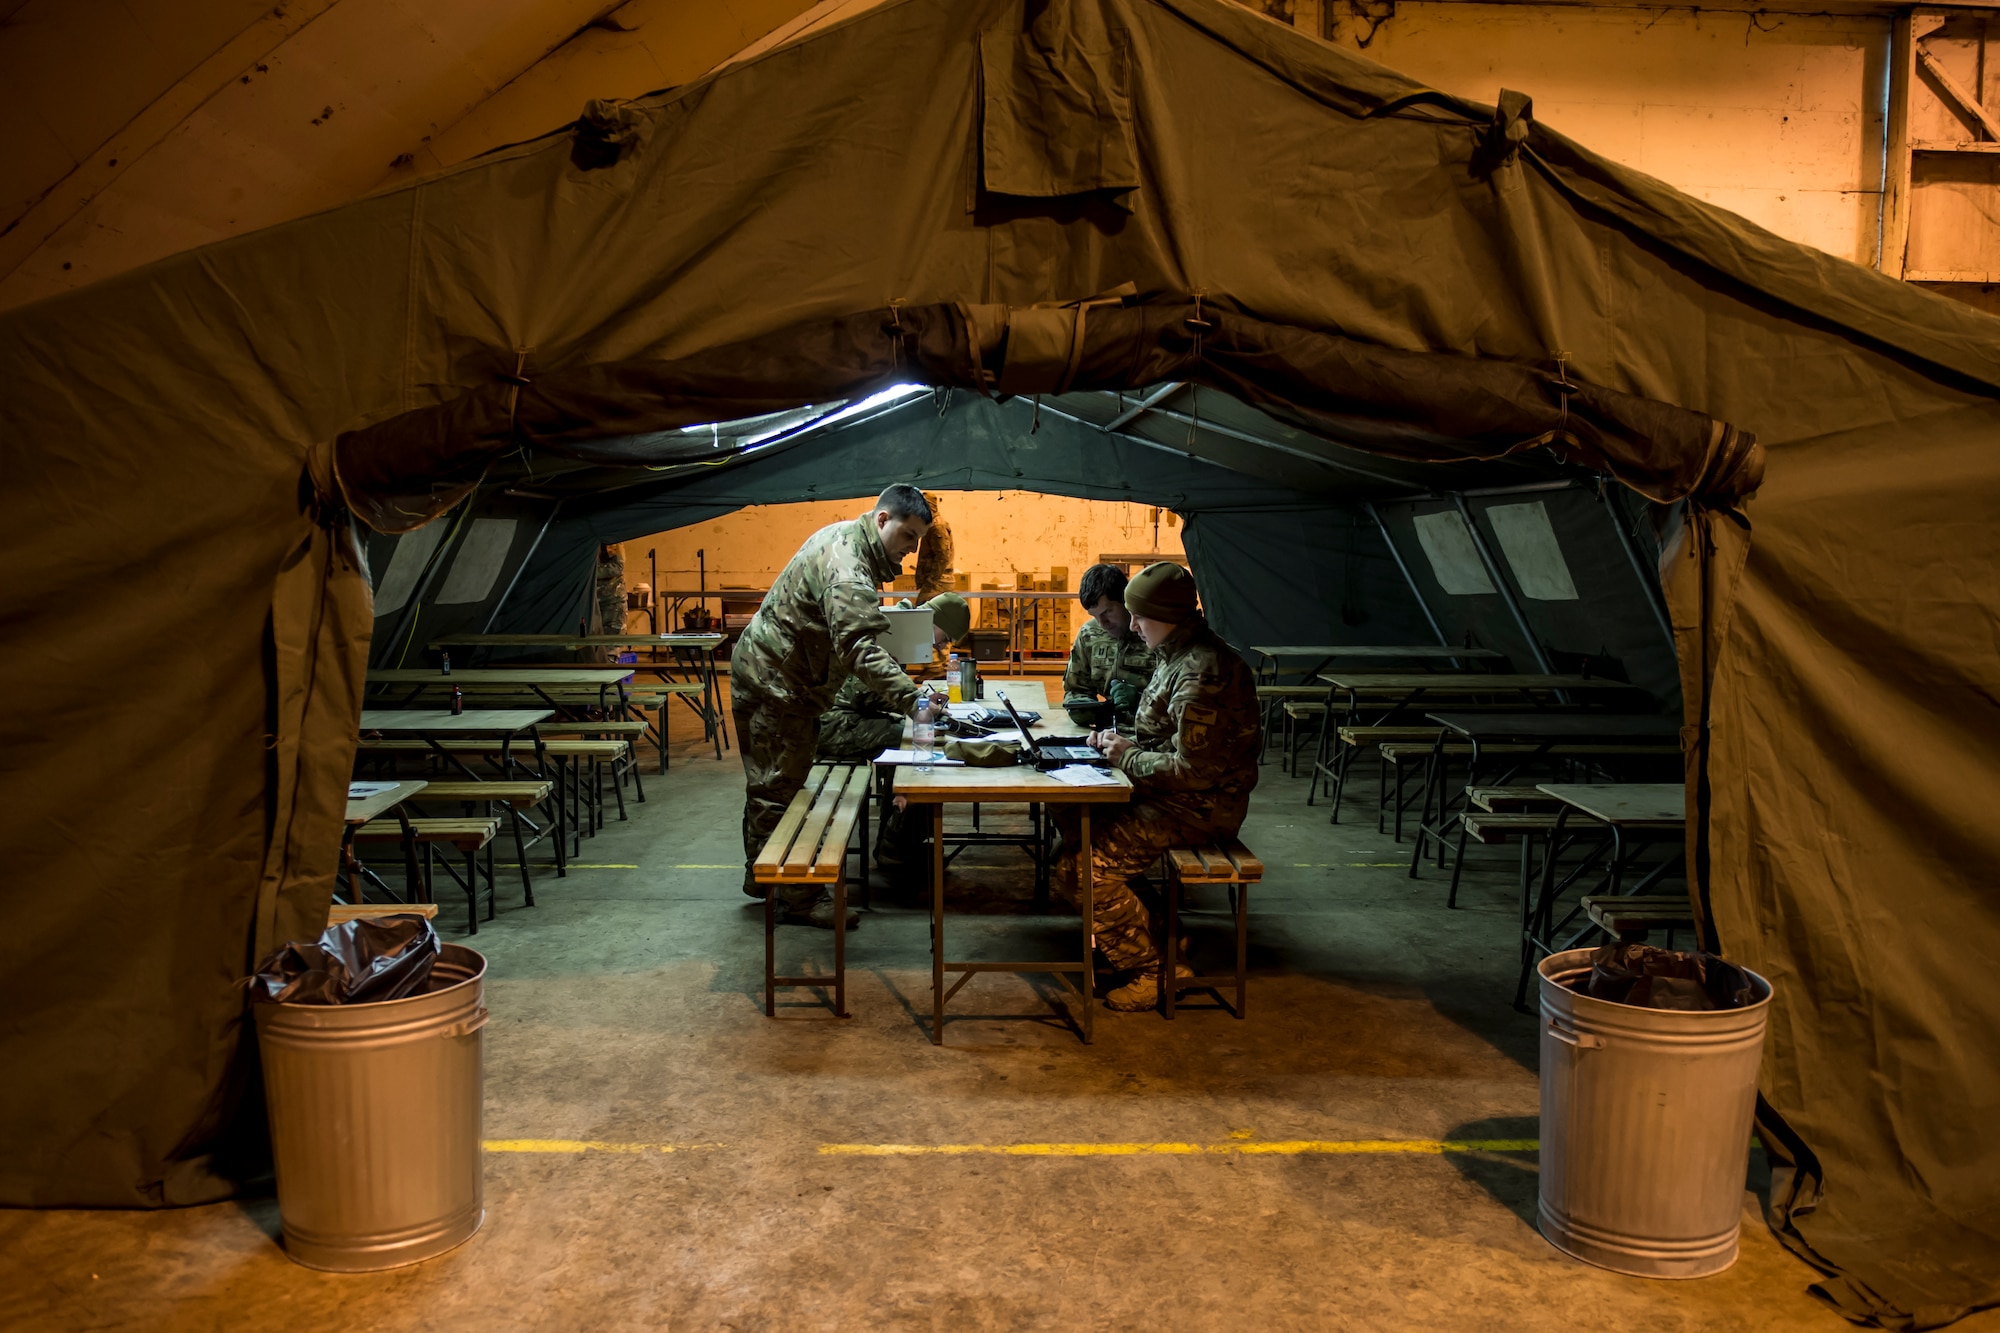 Airmen from the 56th Rescue Squadron debrief after a night flight during exercise Voijek Valour at Hullavington Airfield, England, March 3, 2016. The exercise included six helicopters, 250 British soldiers and more than a dozen jets conducting scenarios across Salisbury Plain. (U.S. Air Force photo/Airman 1st Class Erin R. Babis)